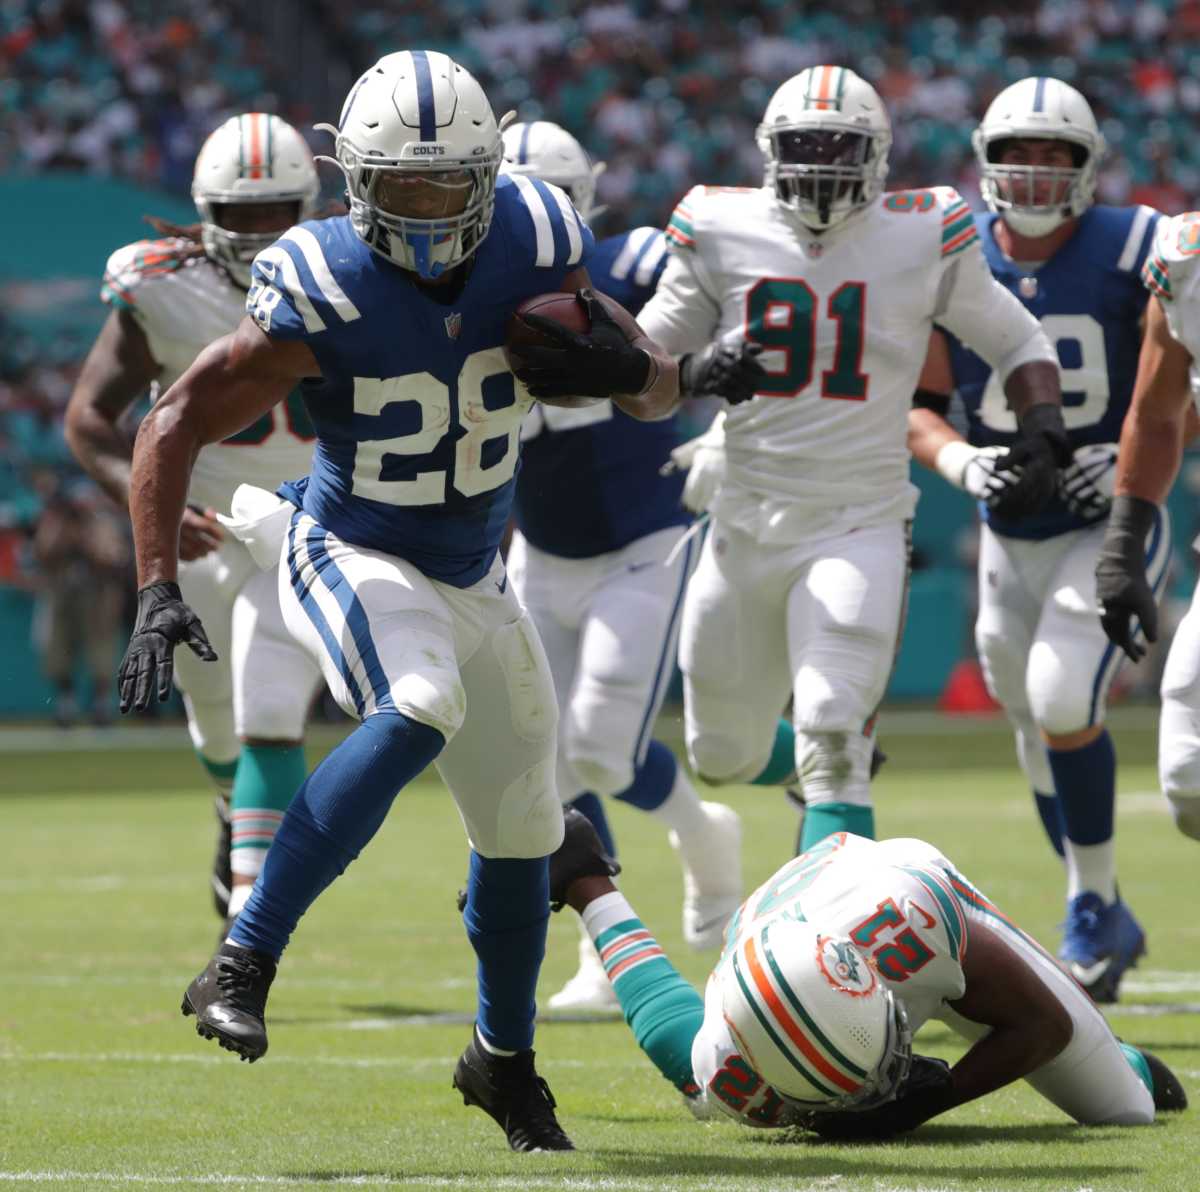 Running back Jonathan Taylor sheds a defender as he runs in for a touchdown at Hard Rock Stadium in Miami Gardens, Fla., on Sunday, Oct. 3, 2021, during first half Miami vs. Indianapolis action. 100321 Coltsmiami 019 Jw